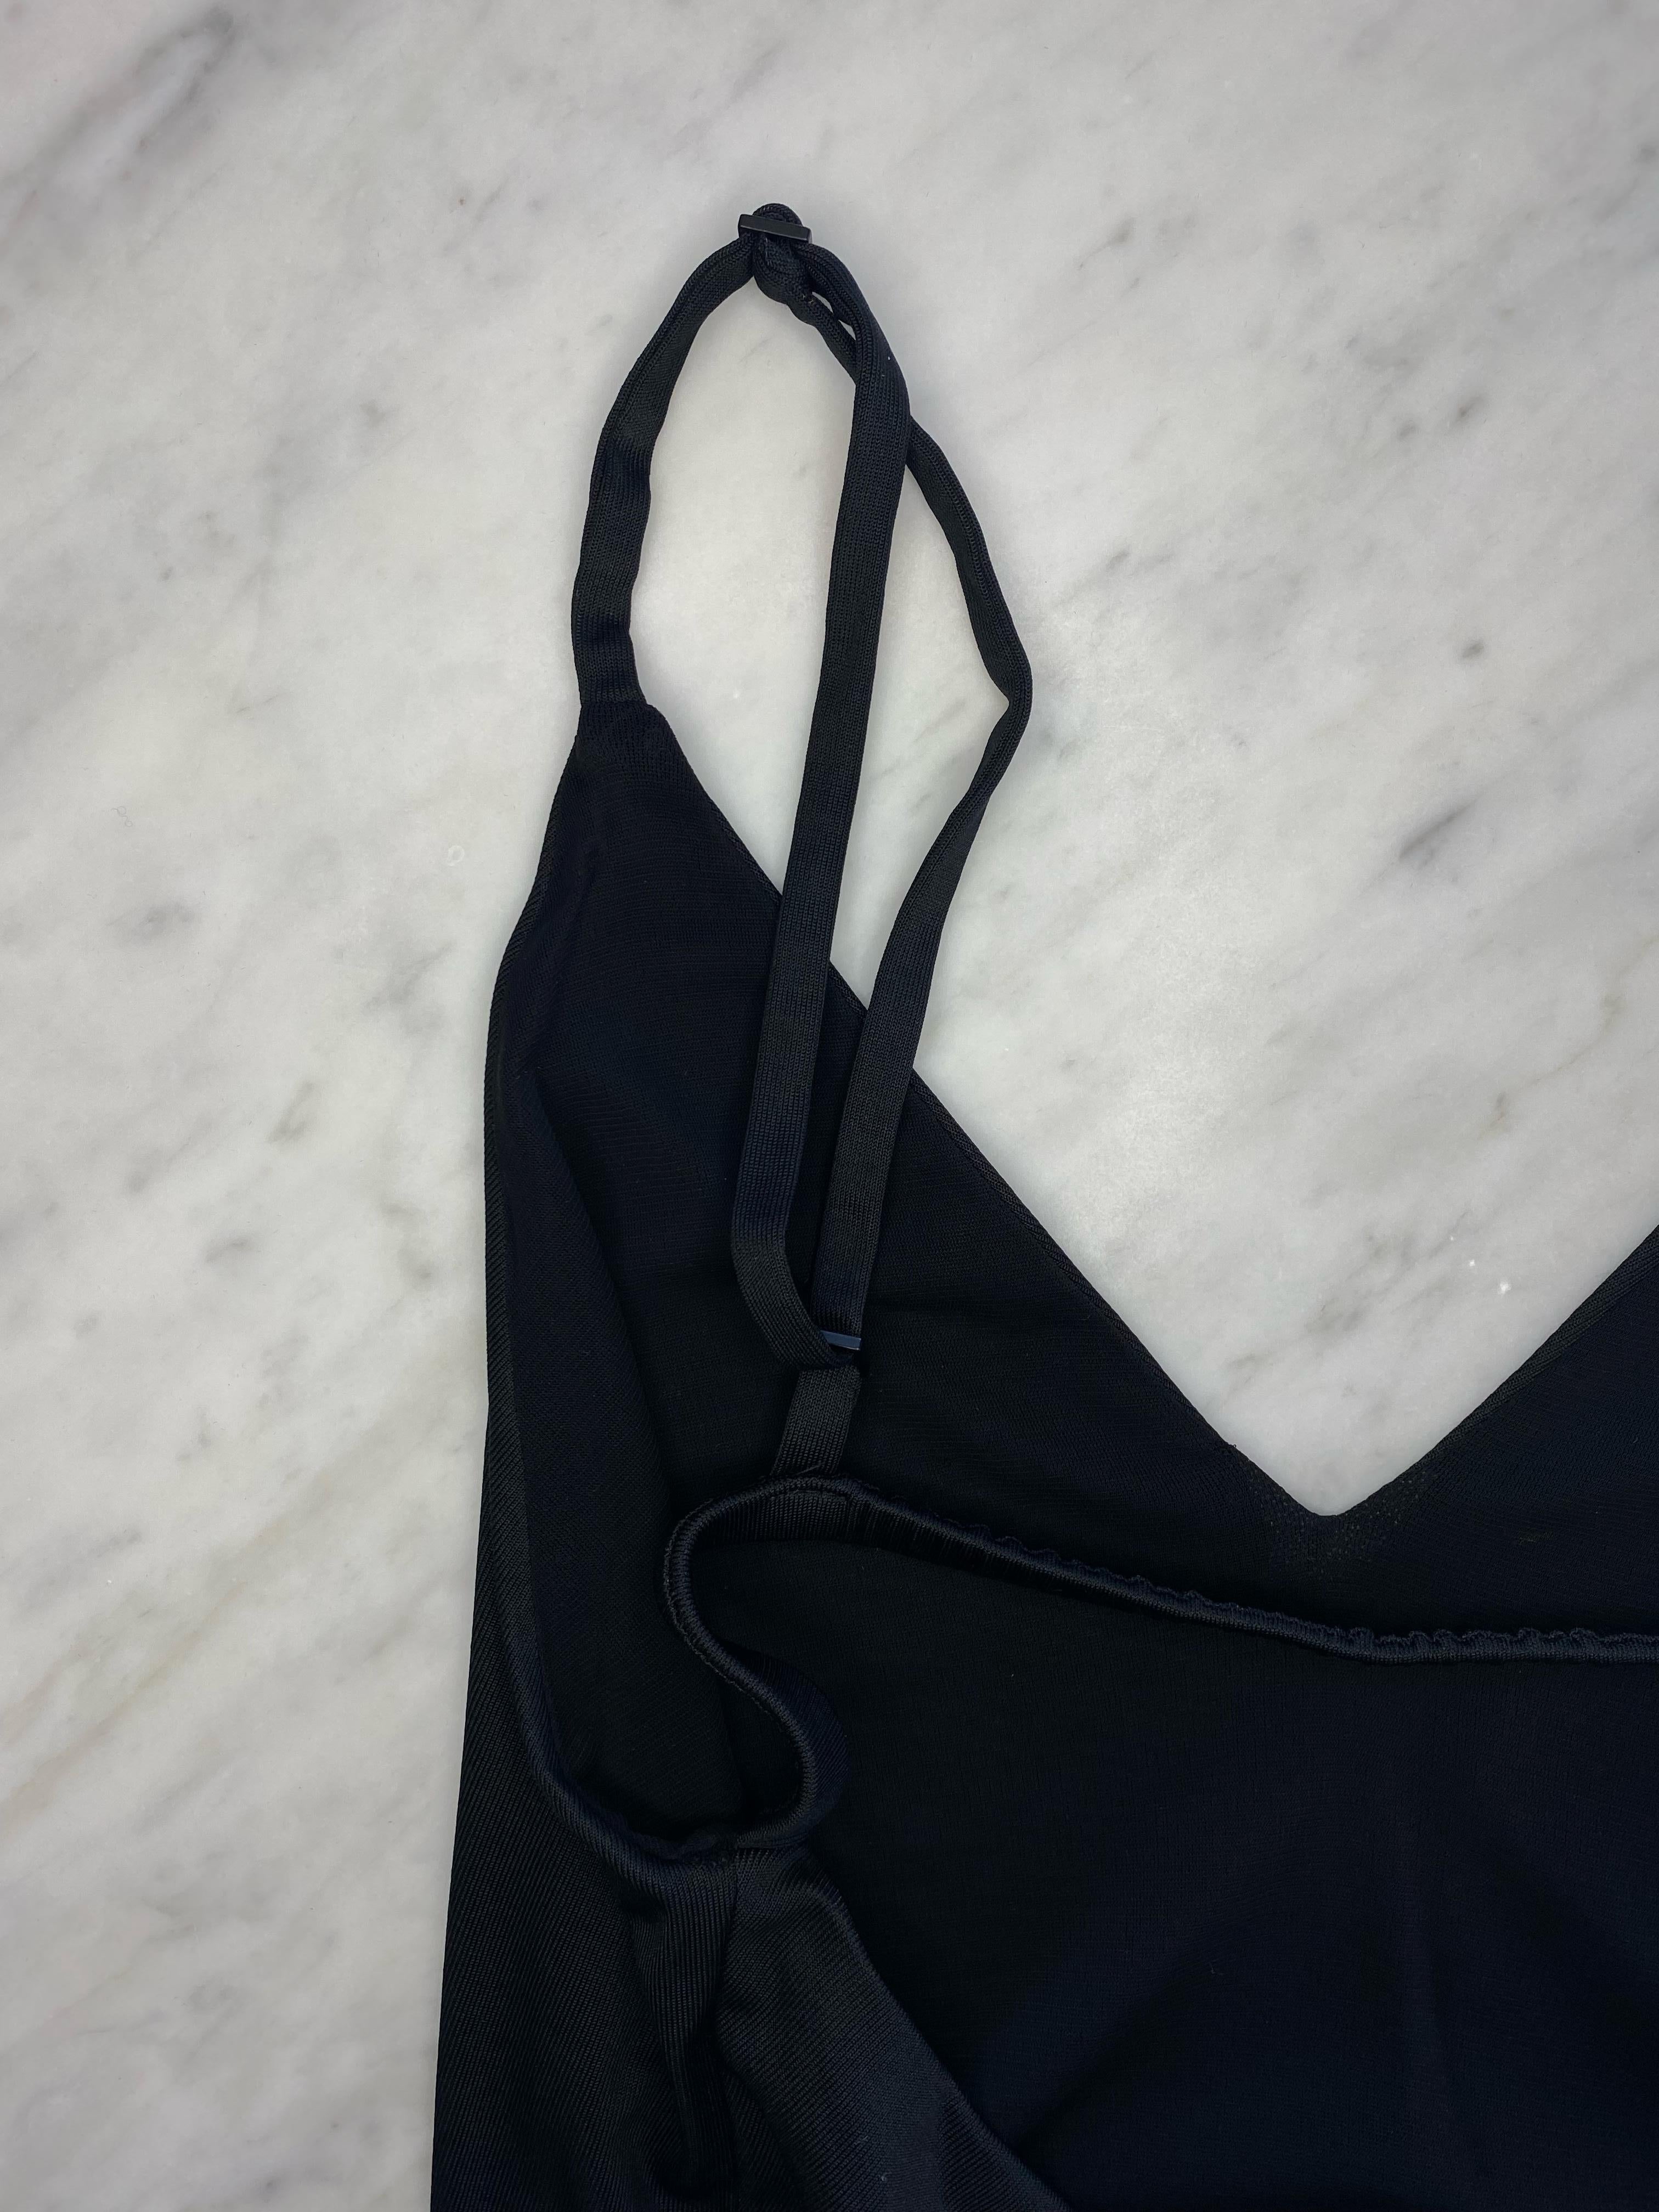 S/S 2001 Gucci by Tom Ford Backless Bra Strap Black Top In Good Condition For Sale In West Hollywood, CA